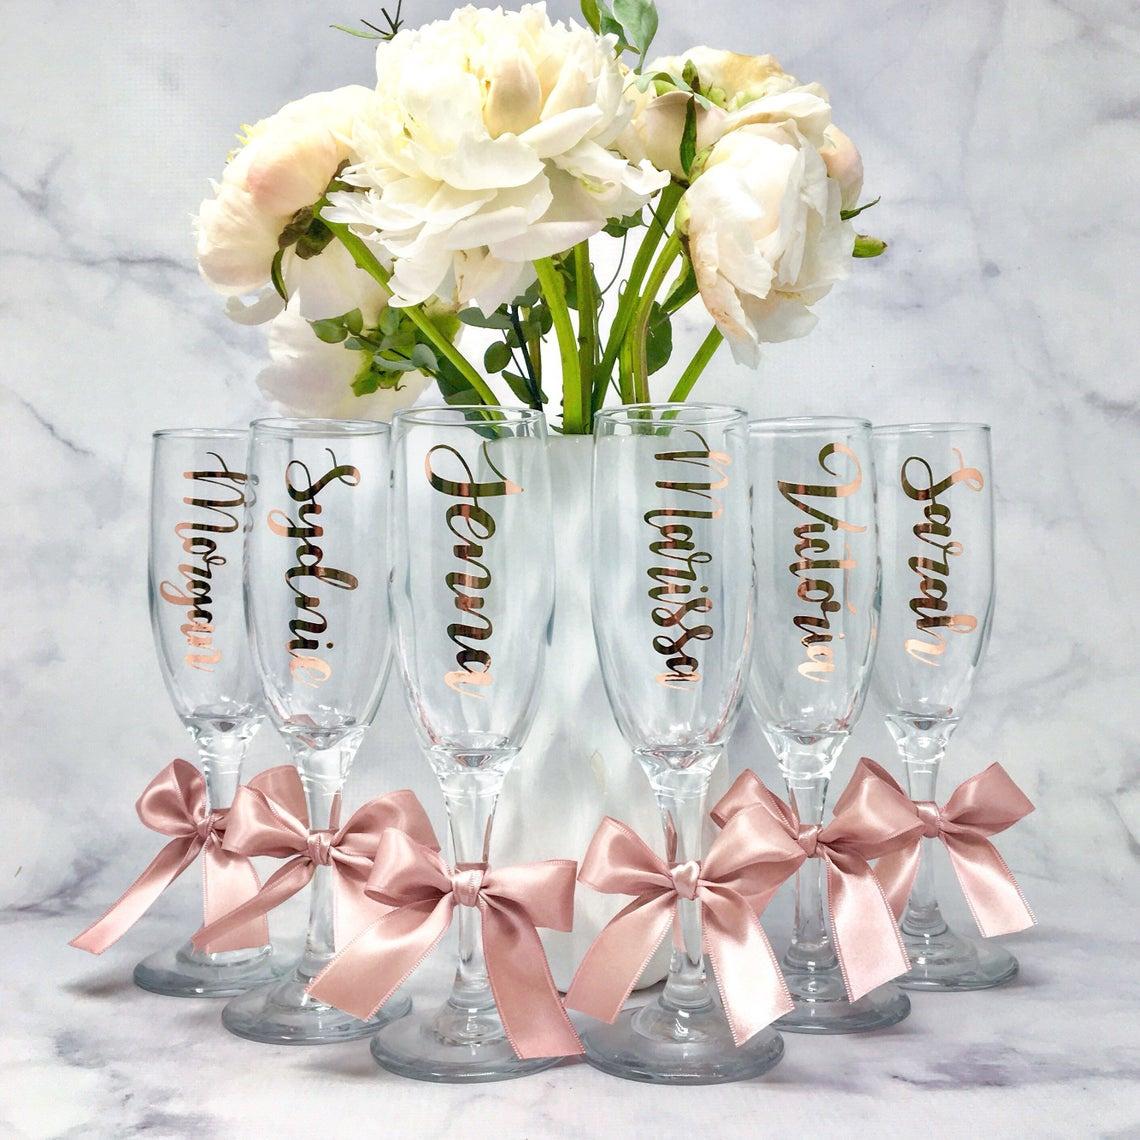 20 Best Bachelorette Party Gifts for 2022 - Bachelorette Gift